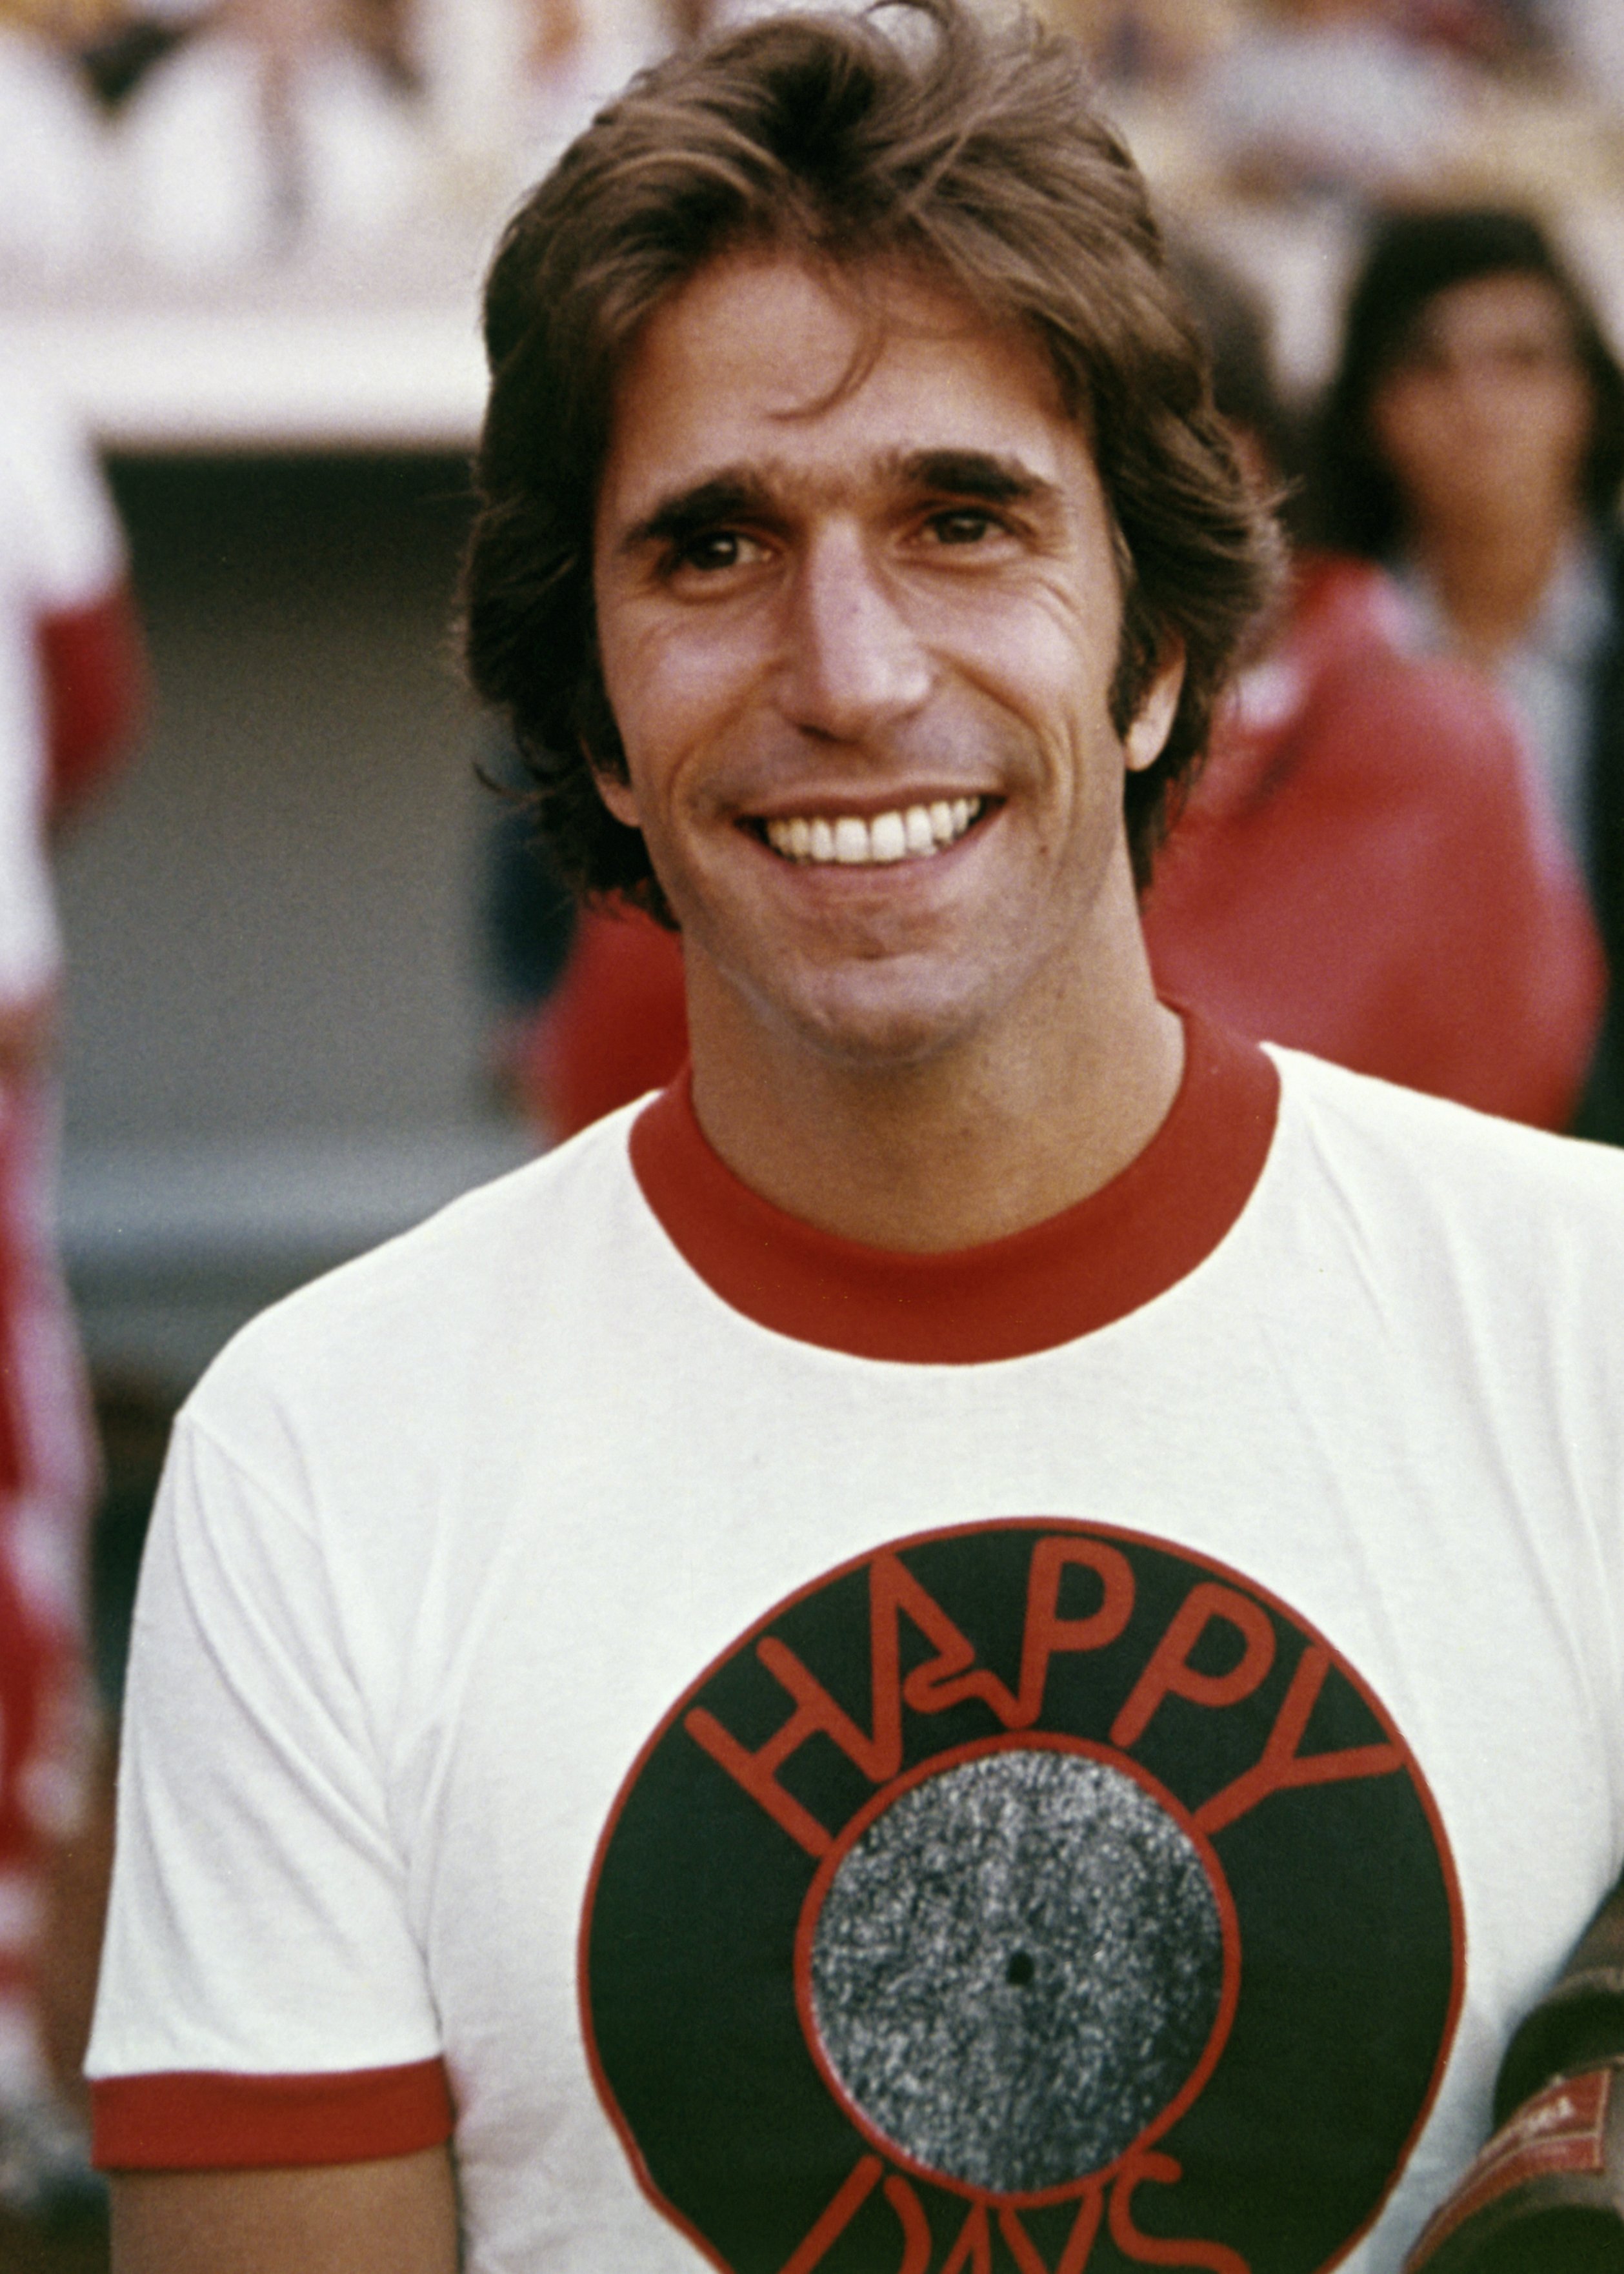 Henry Winkler circa 1975 | Source: Getty Images